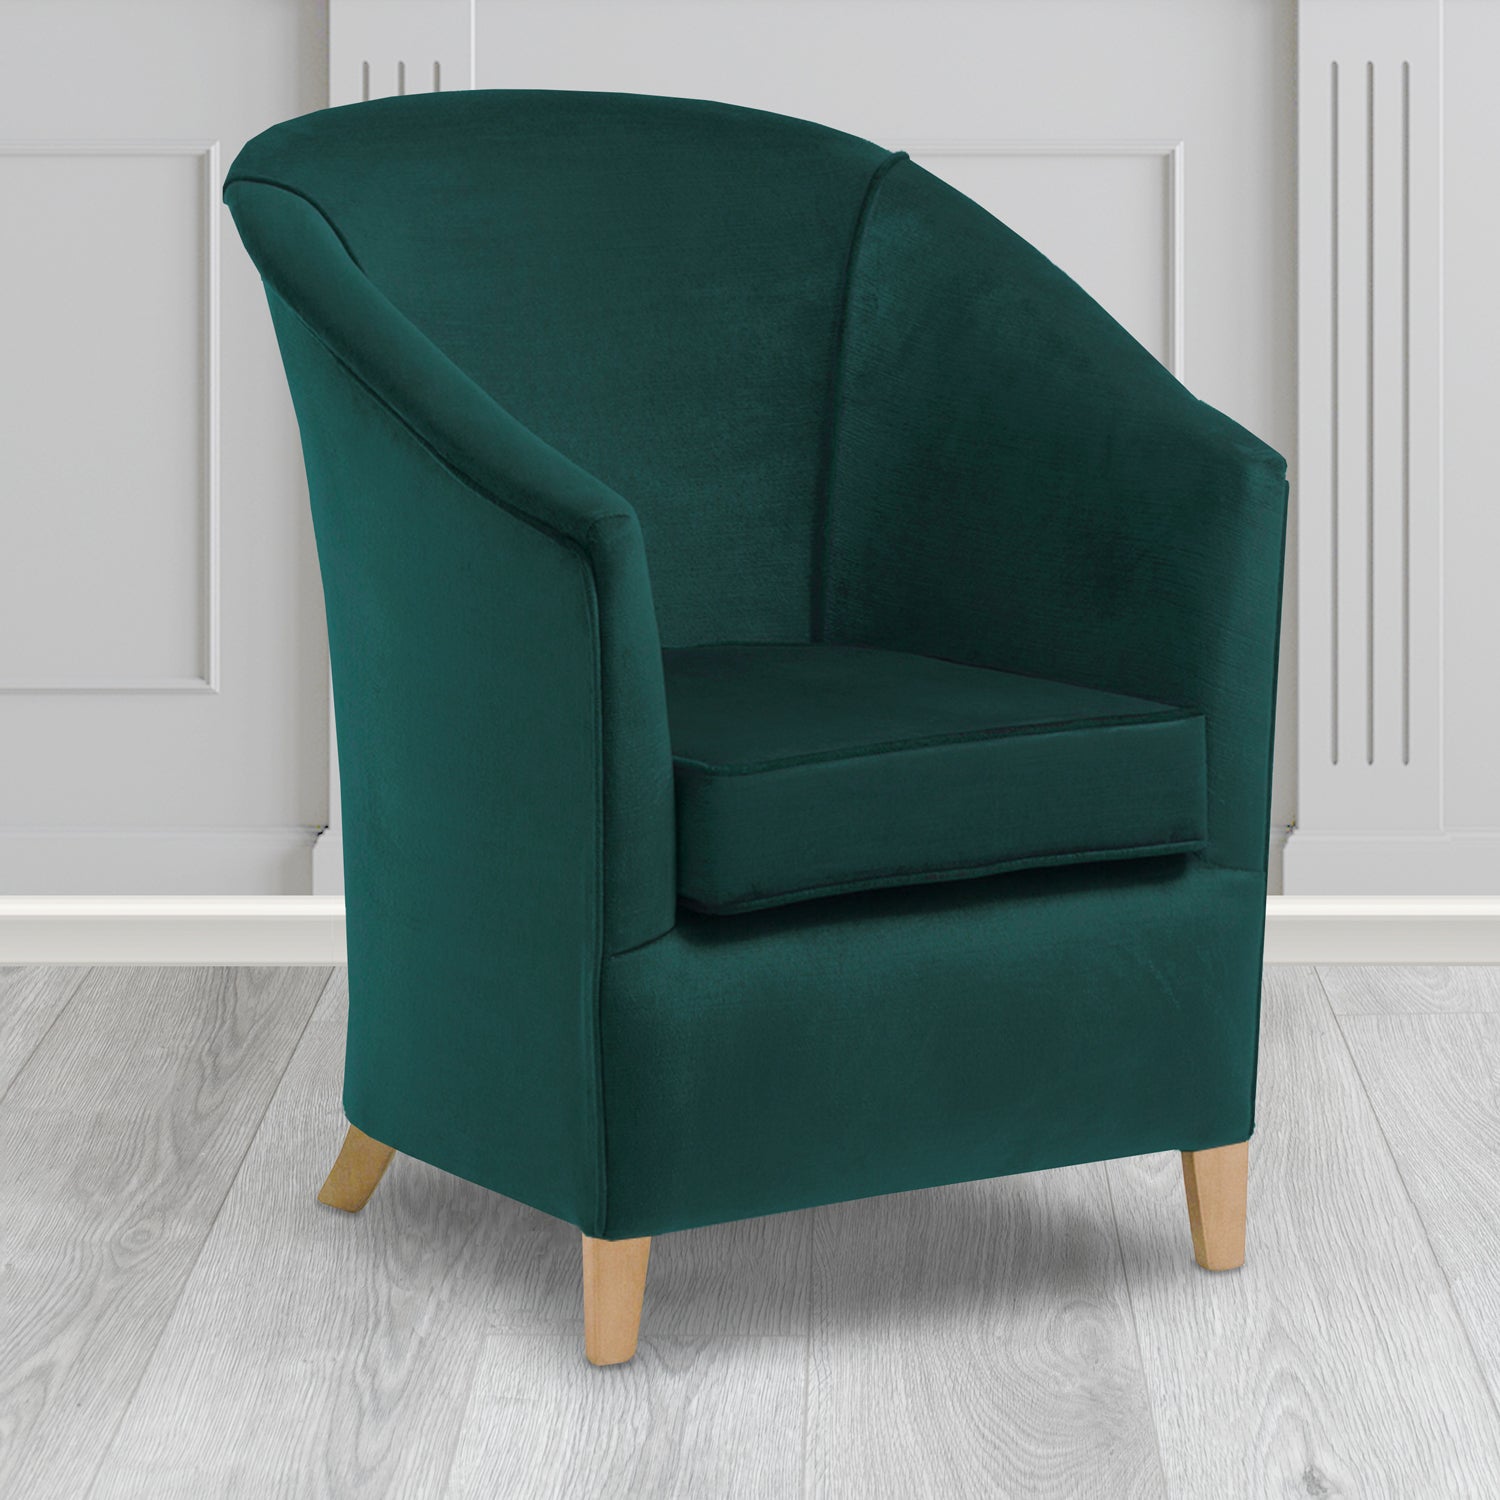 Bolton Tub Chair in Noble 203 Emerald Crib 5 Velvet Fabric - Water Resistant - The Tub Chair Shop